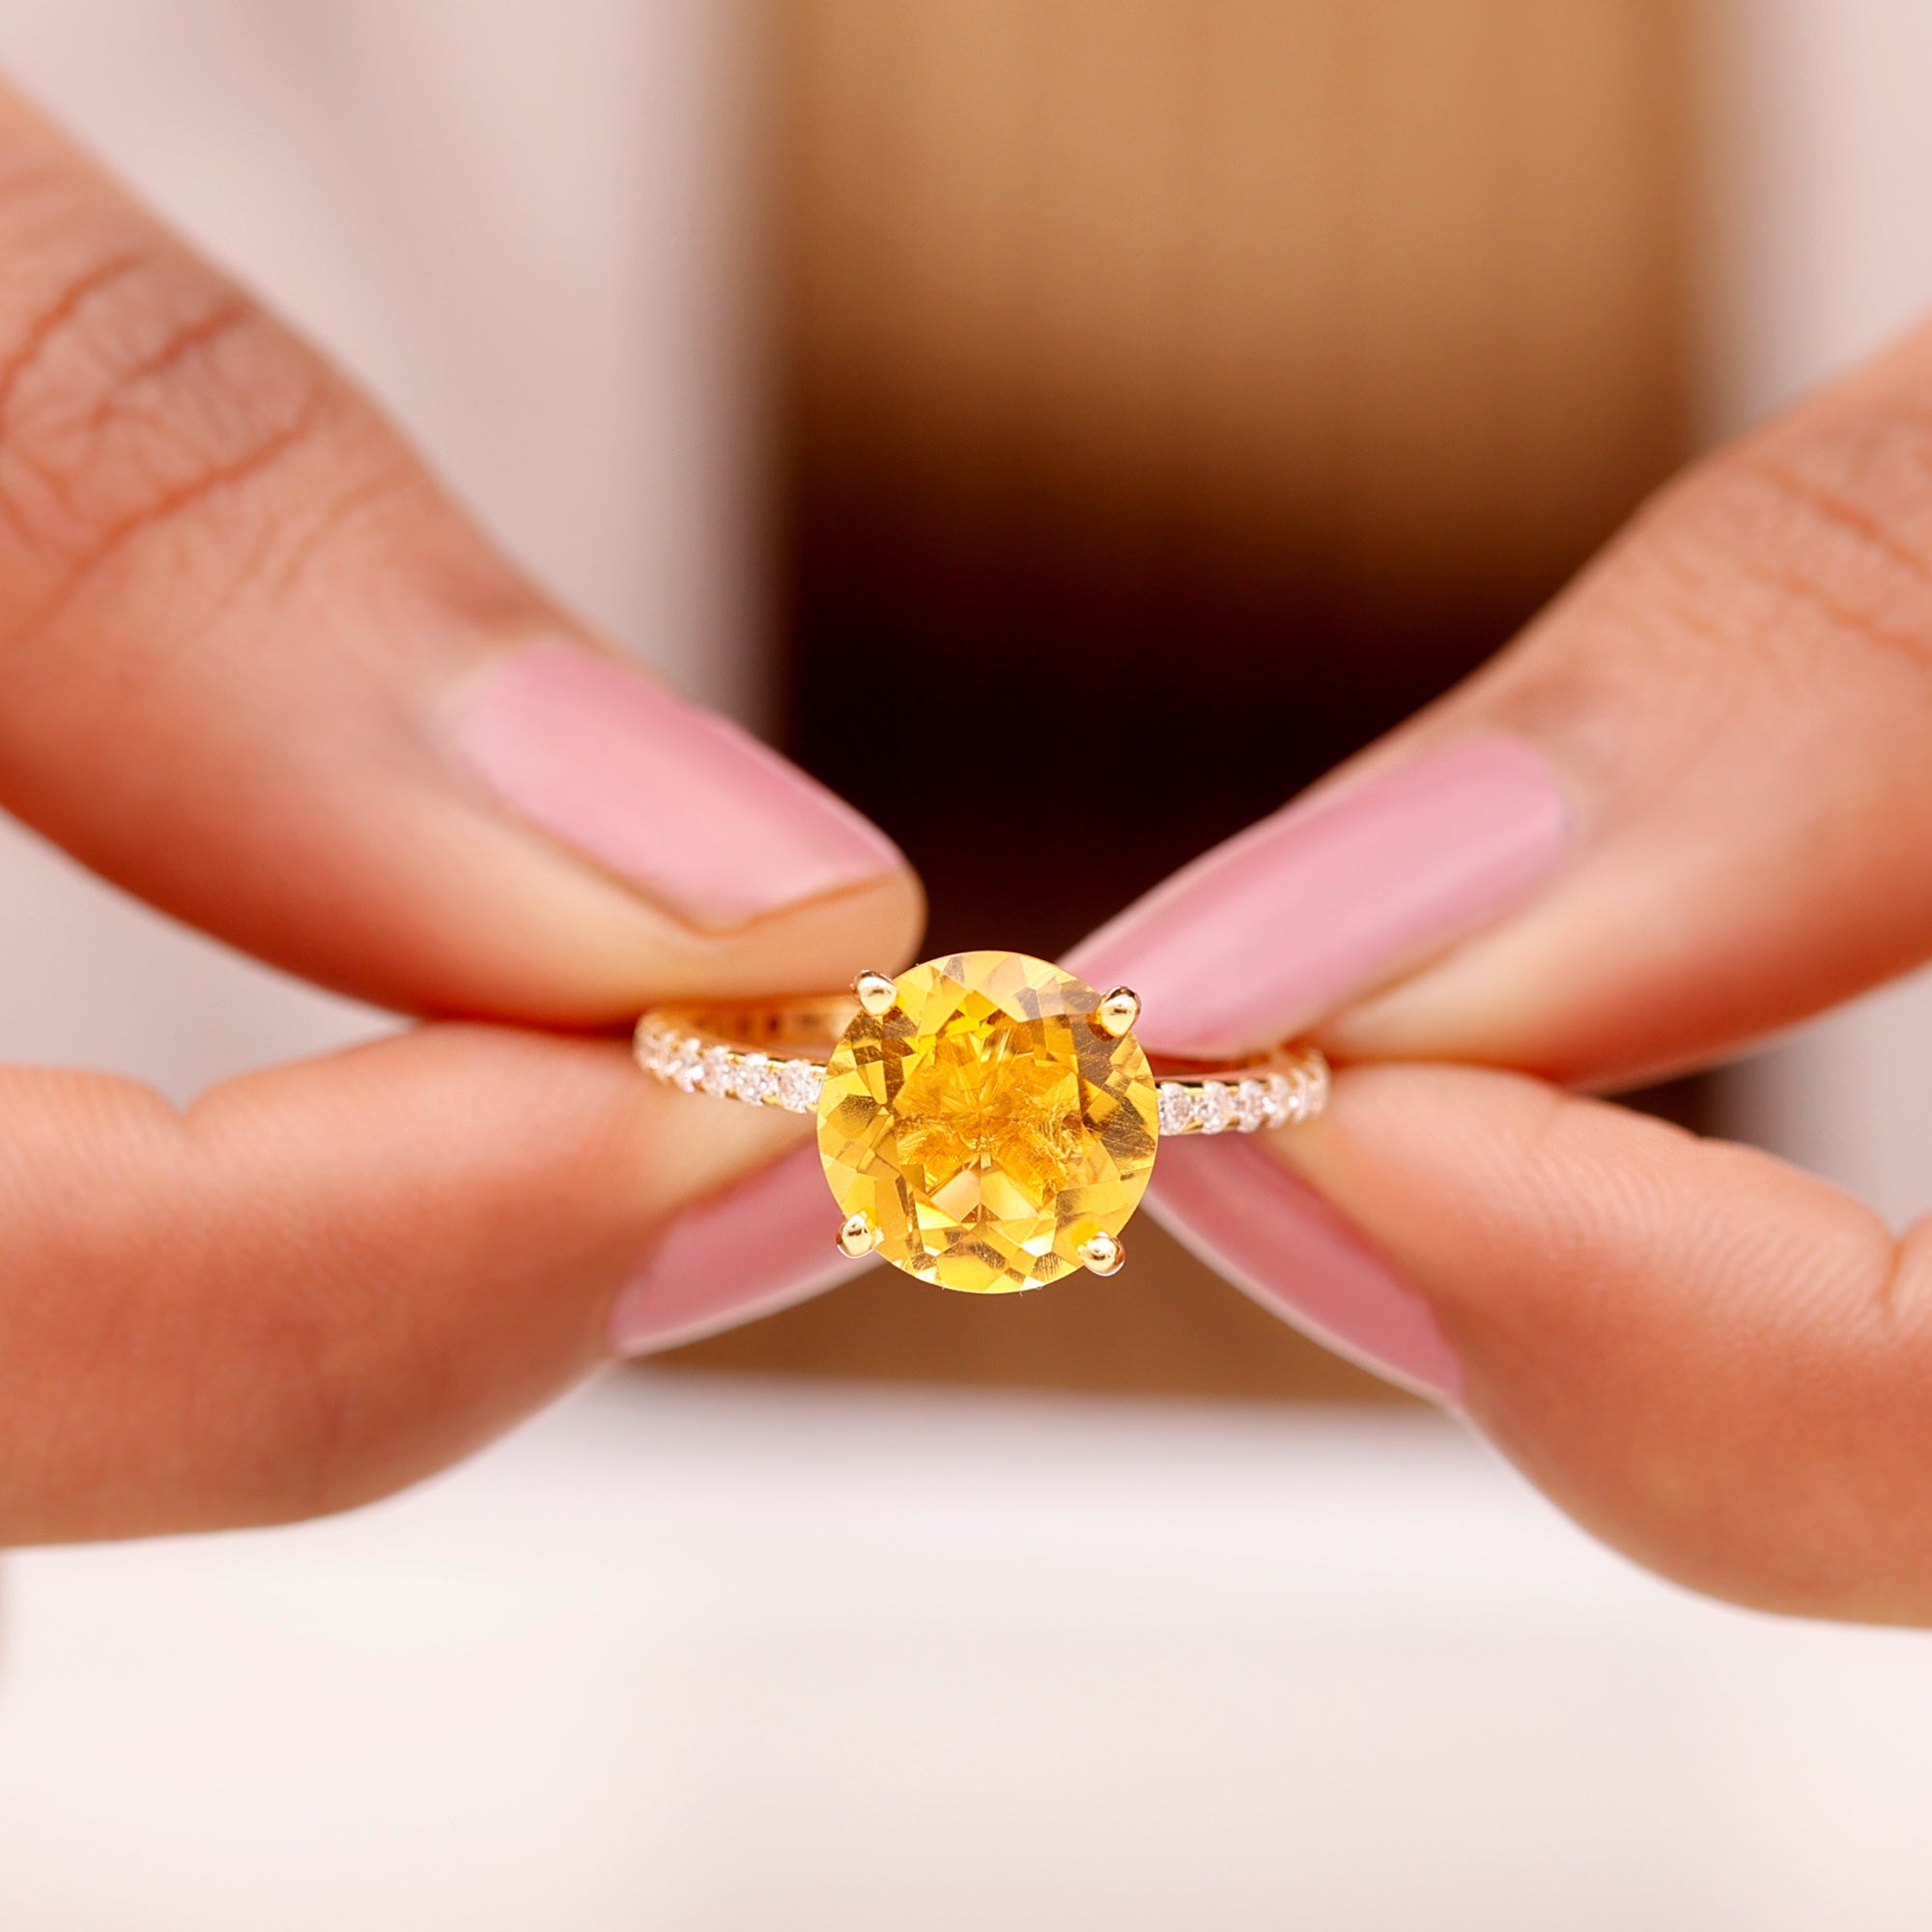 Created Yellow Sapphire Solitaire Engagement Ring with Diamond Lab Created Yellow Sapphire - ( AAAA ) - Quality - Rosec Jewels